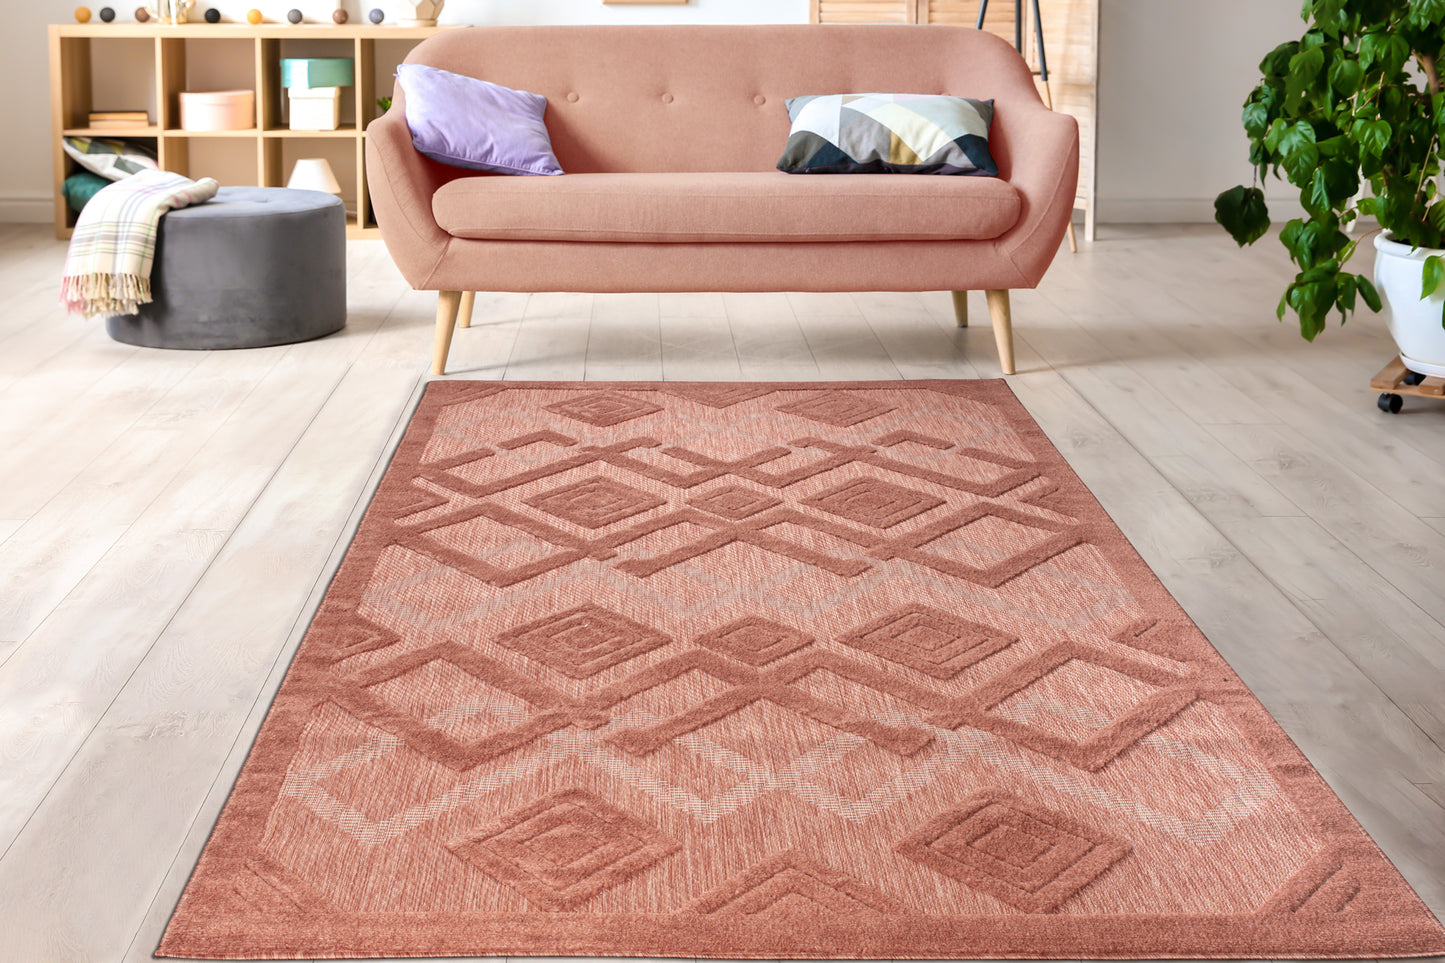 LaDole Rugs Geometric Modern Contemporary Area Rug - Durable Premium Carpet for Living Room, Bedroom, and Office - Salmon Red, Blue, Cream Beige, Grey